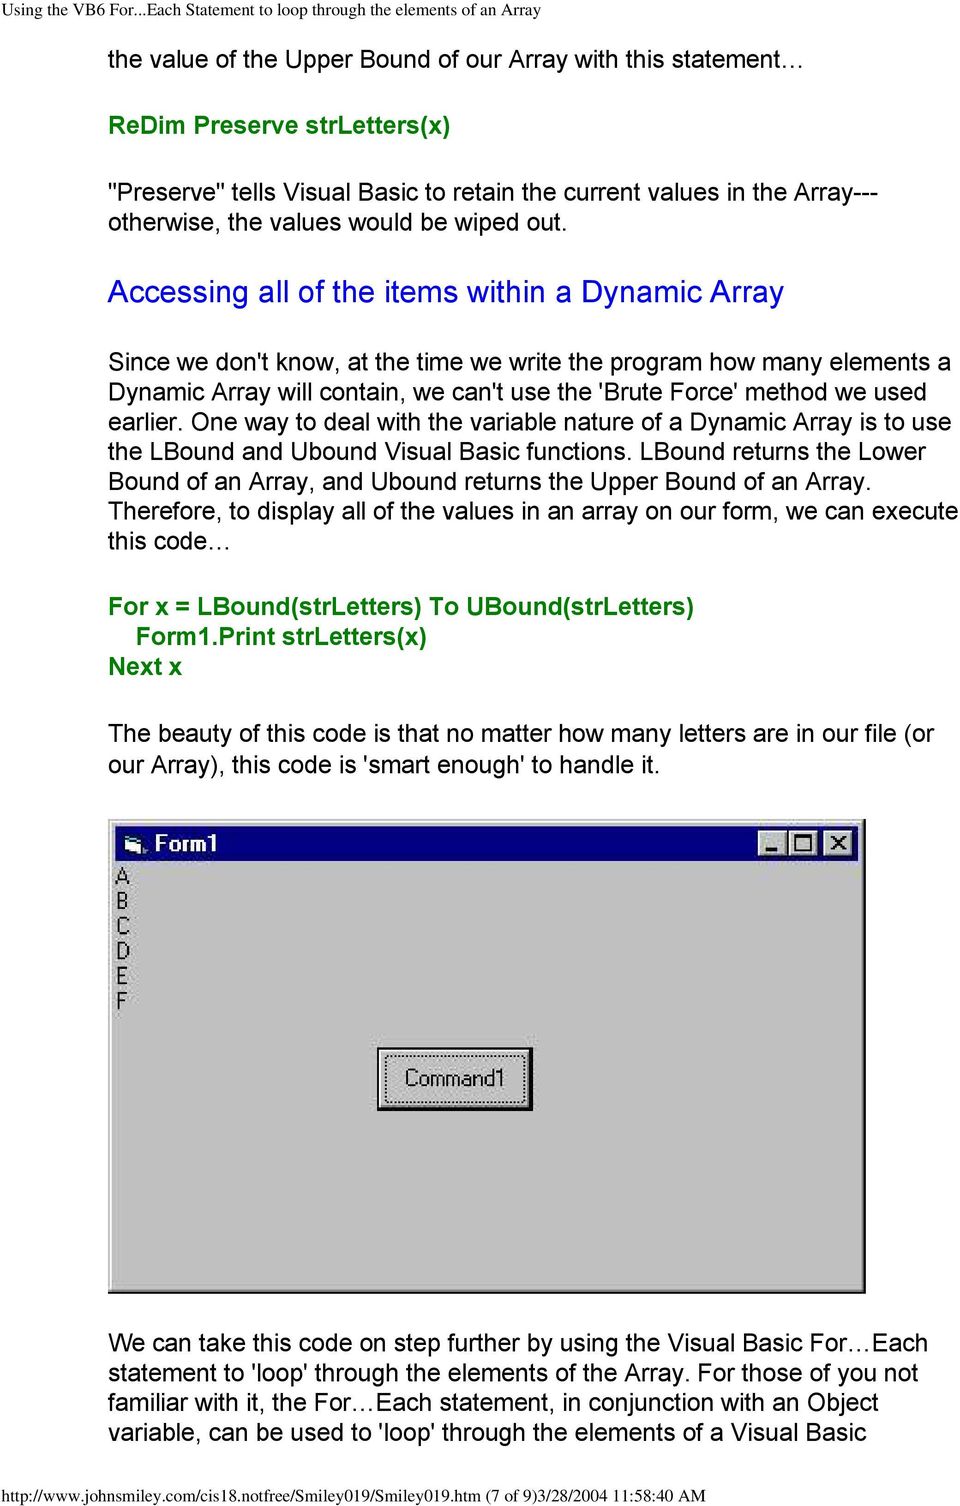 Accessing all of the items within a Dynamic Array Since we don't know, at the time we write the program how many elements a Dynamic Array will contain, we can't use the 'Brute Force' method we used